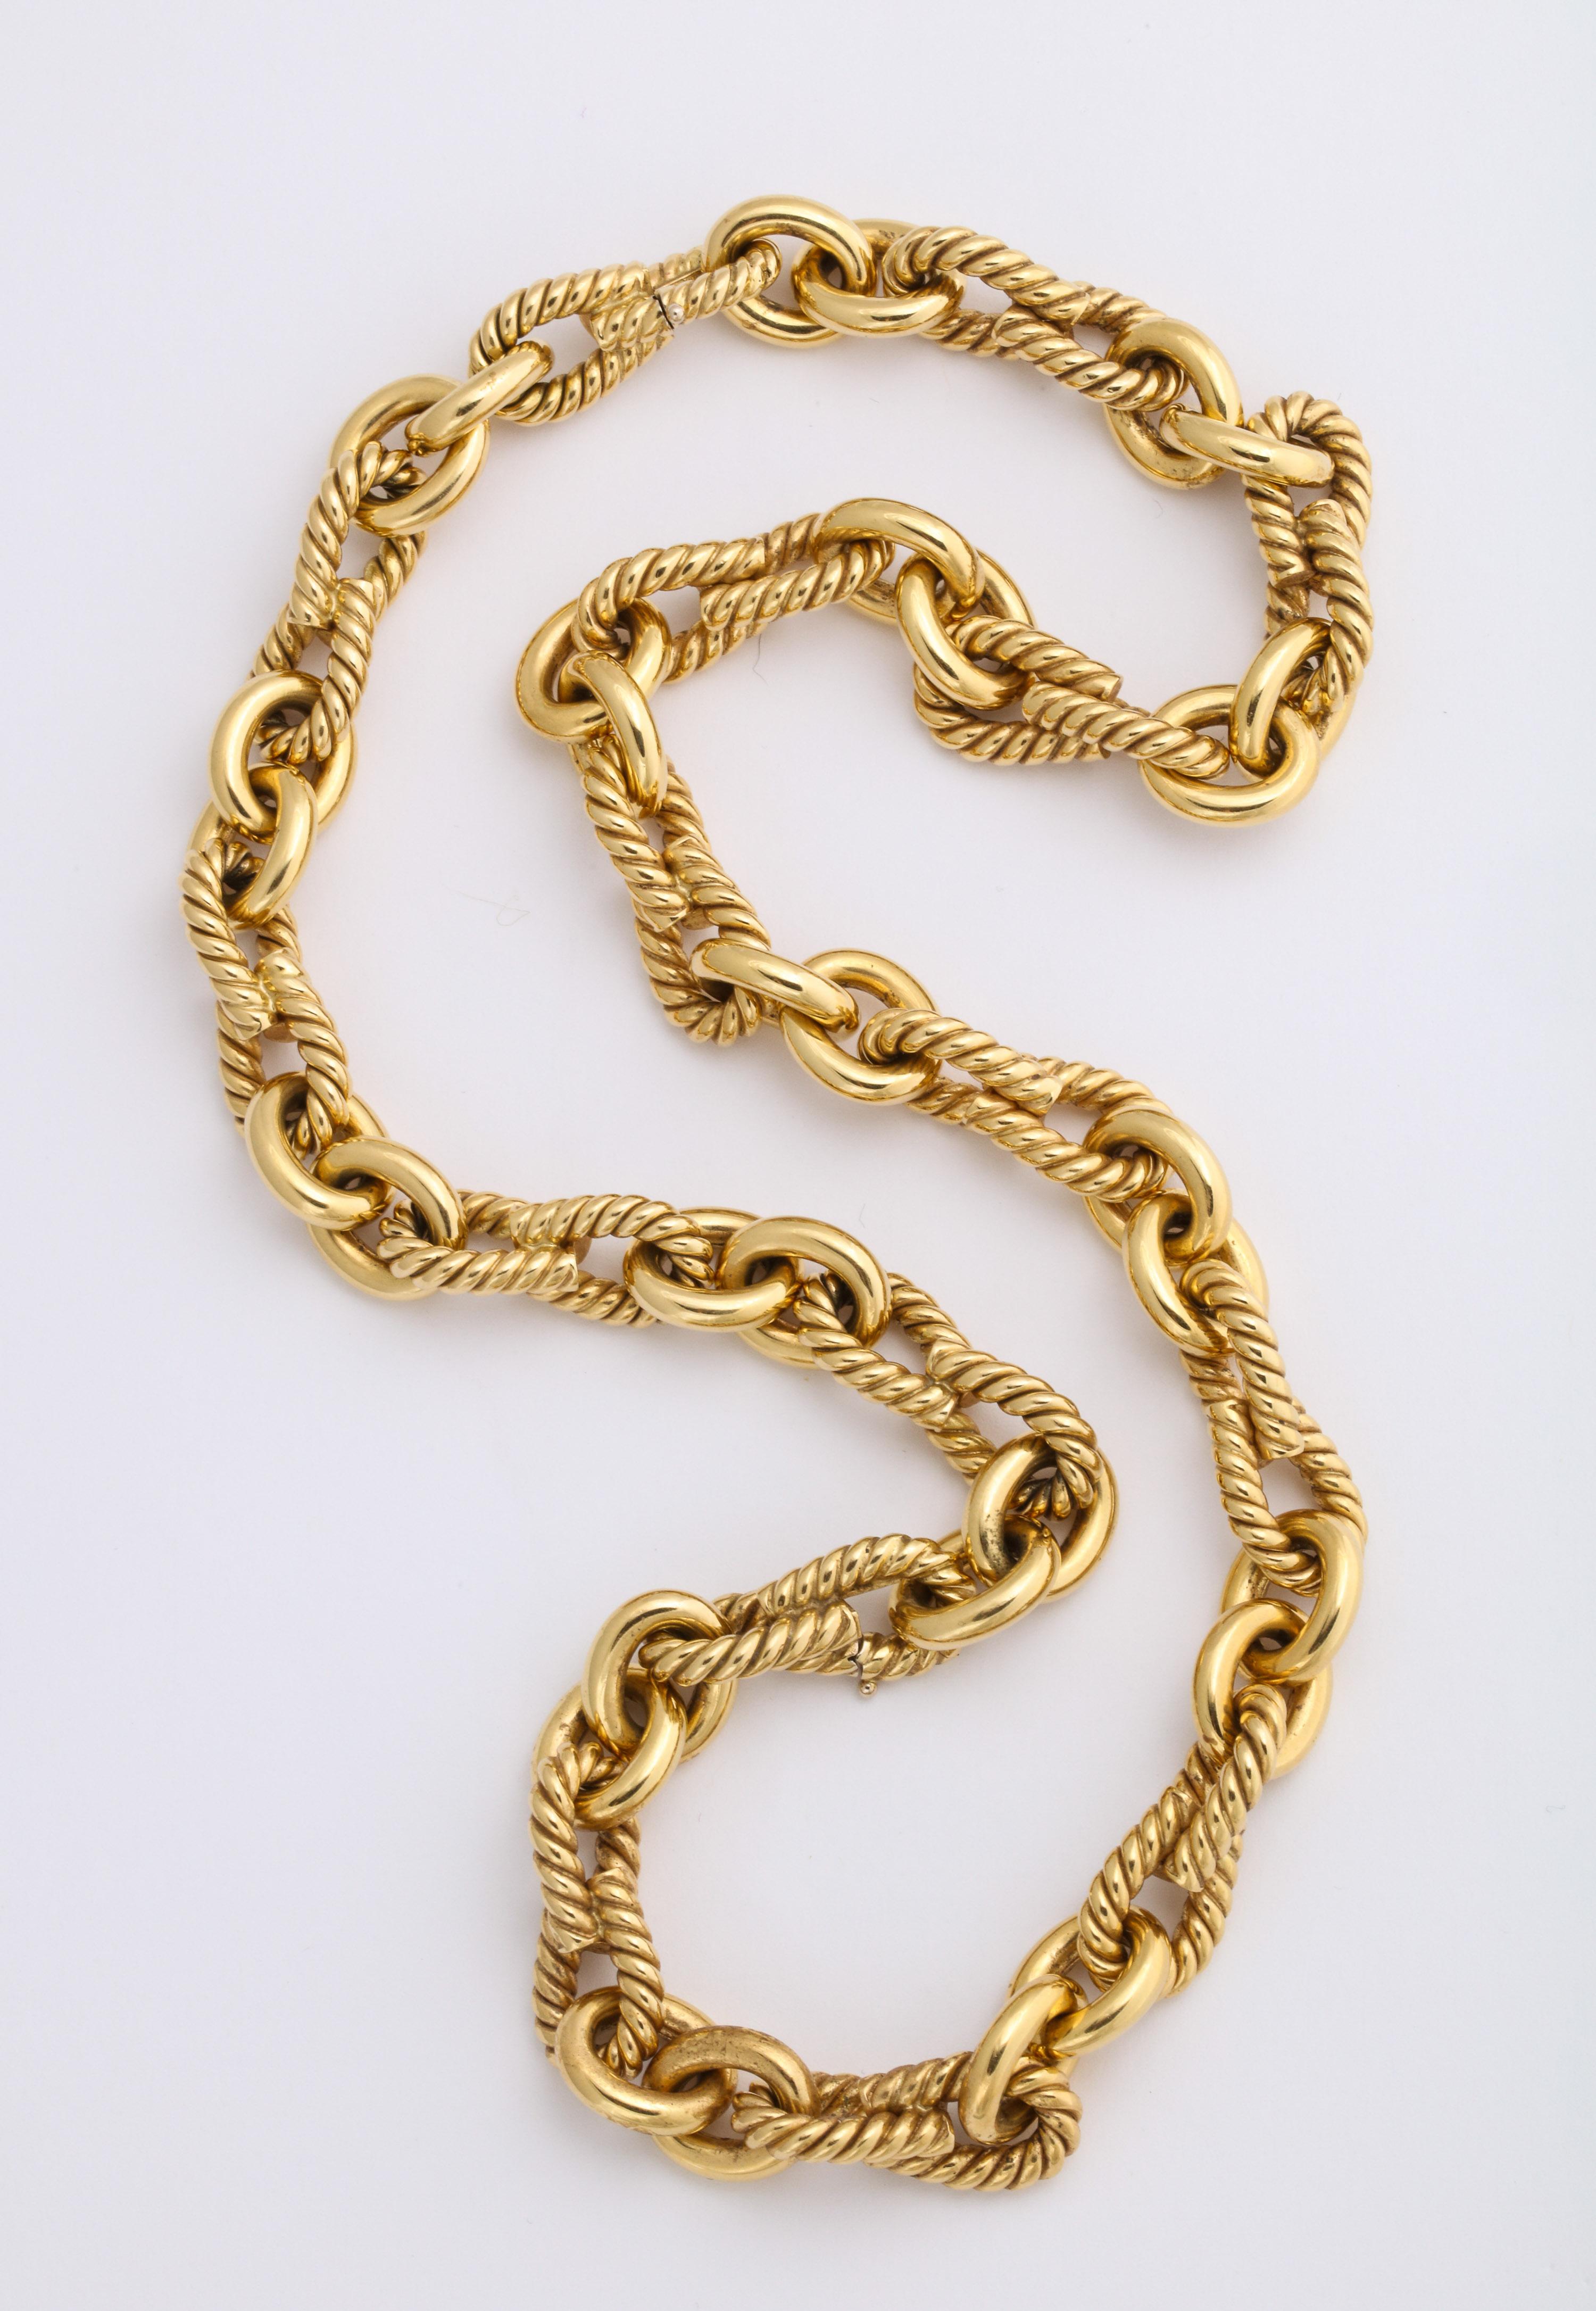 Nicolis Cola 18 Karat Yellow Gold Necklace or Bracelet Set In Excellent Condition For Sale In New York, NY